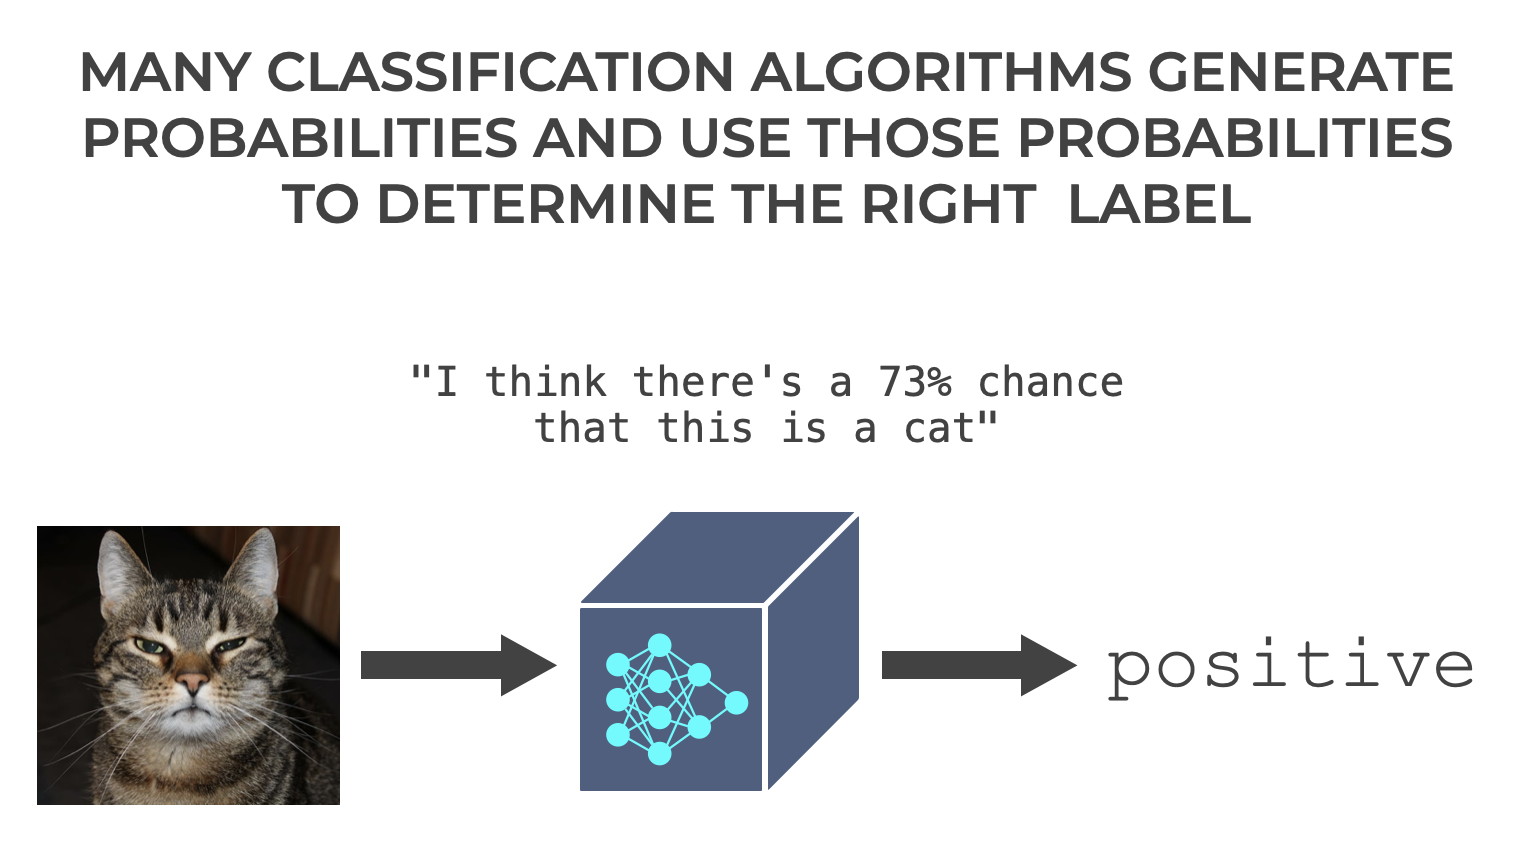 An example that shows how probabilistic classifiers generate a probability score to classify examples.